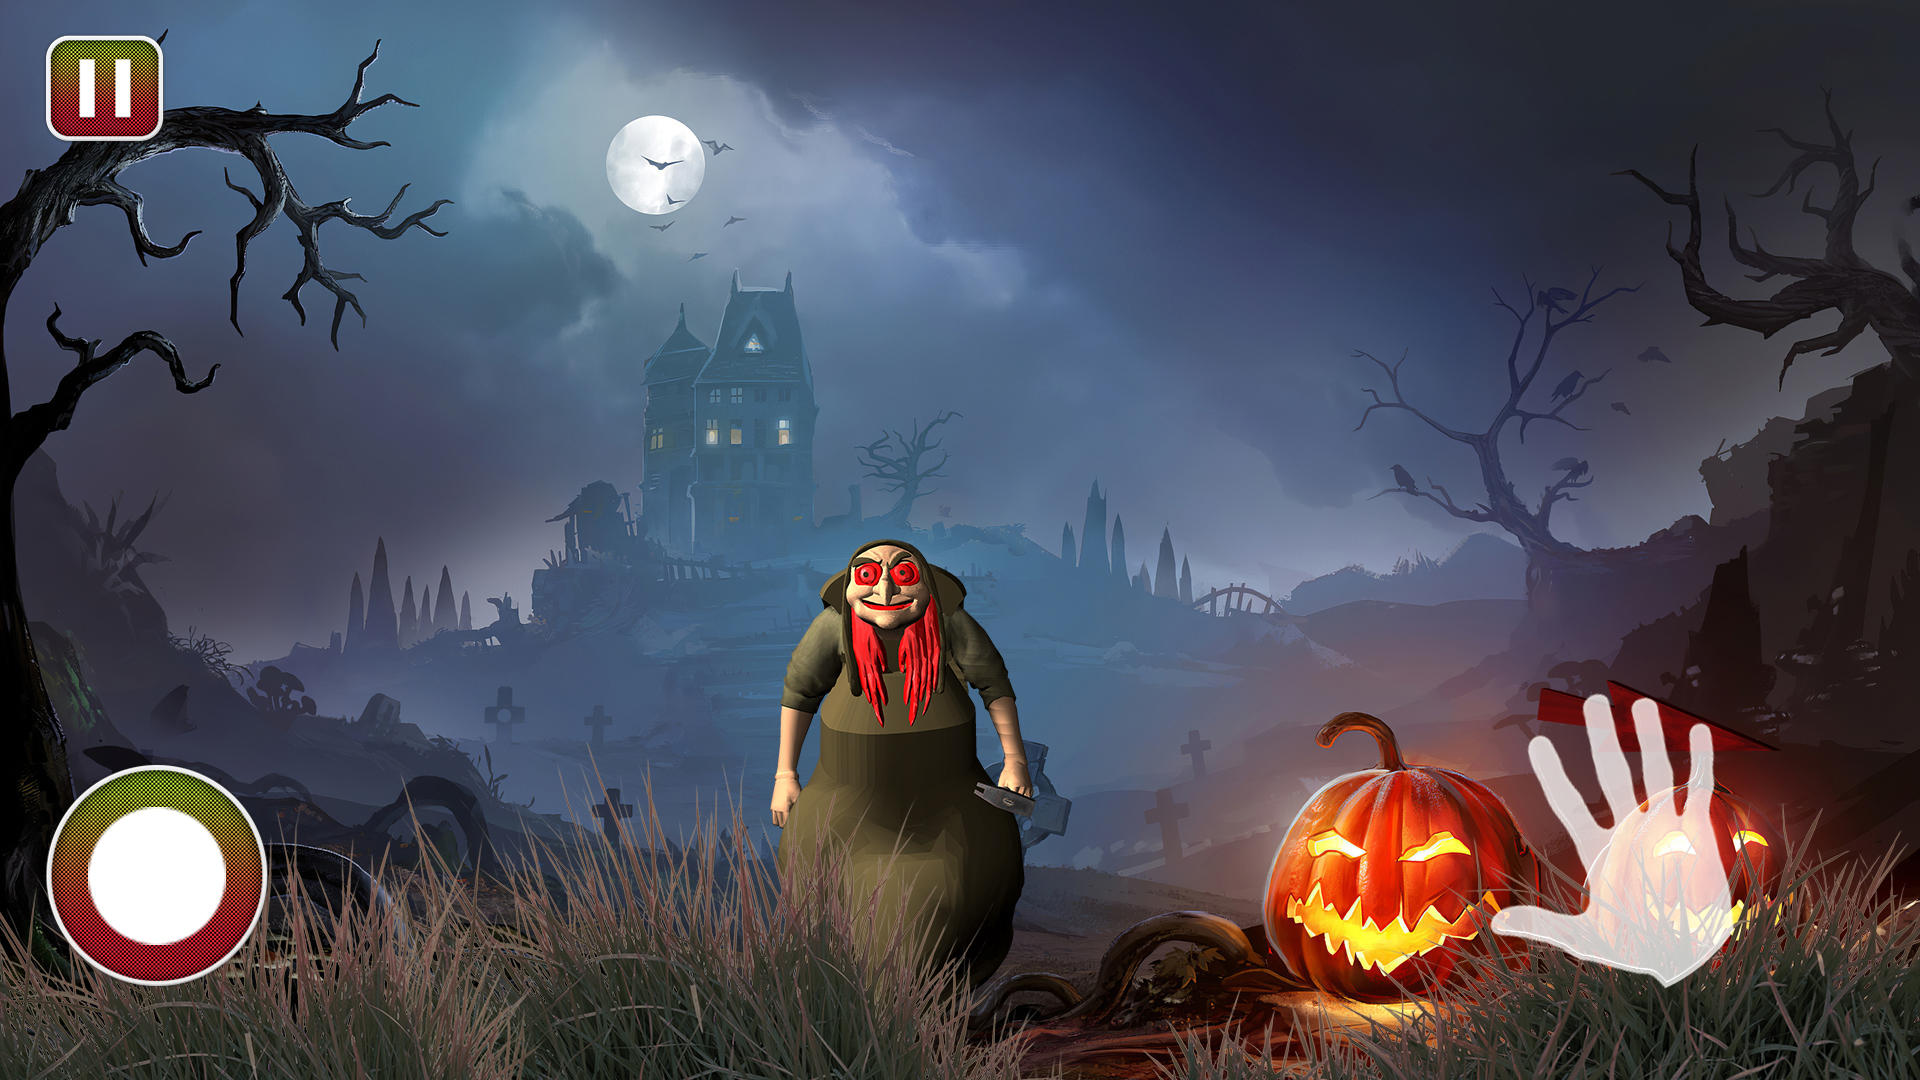 Screenshot 1 of Witch Escape Halloween Game 1.8